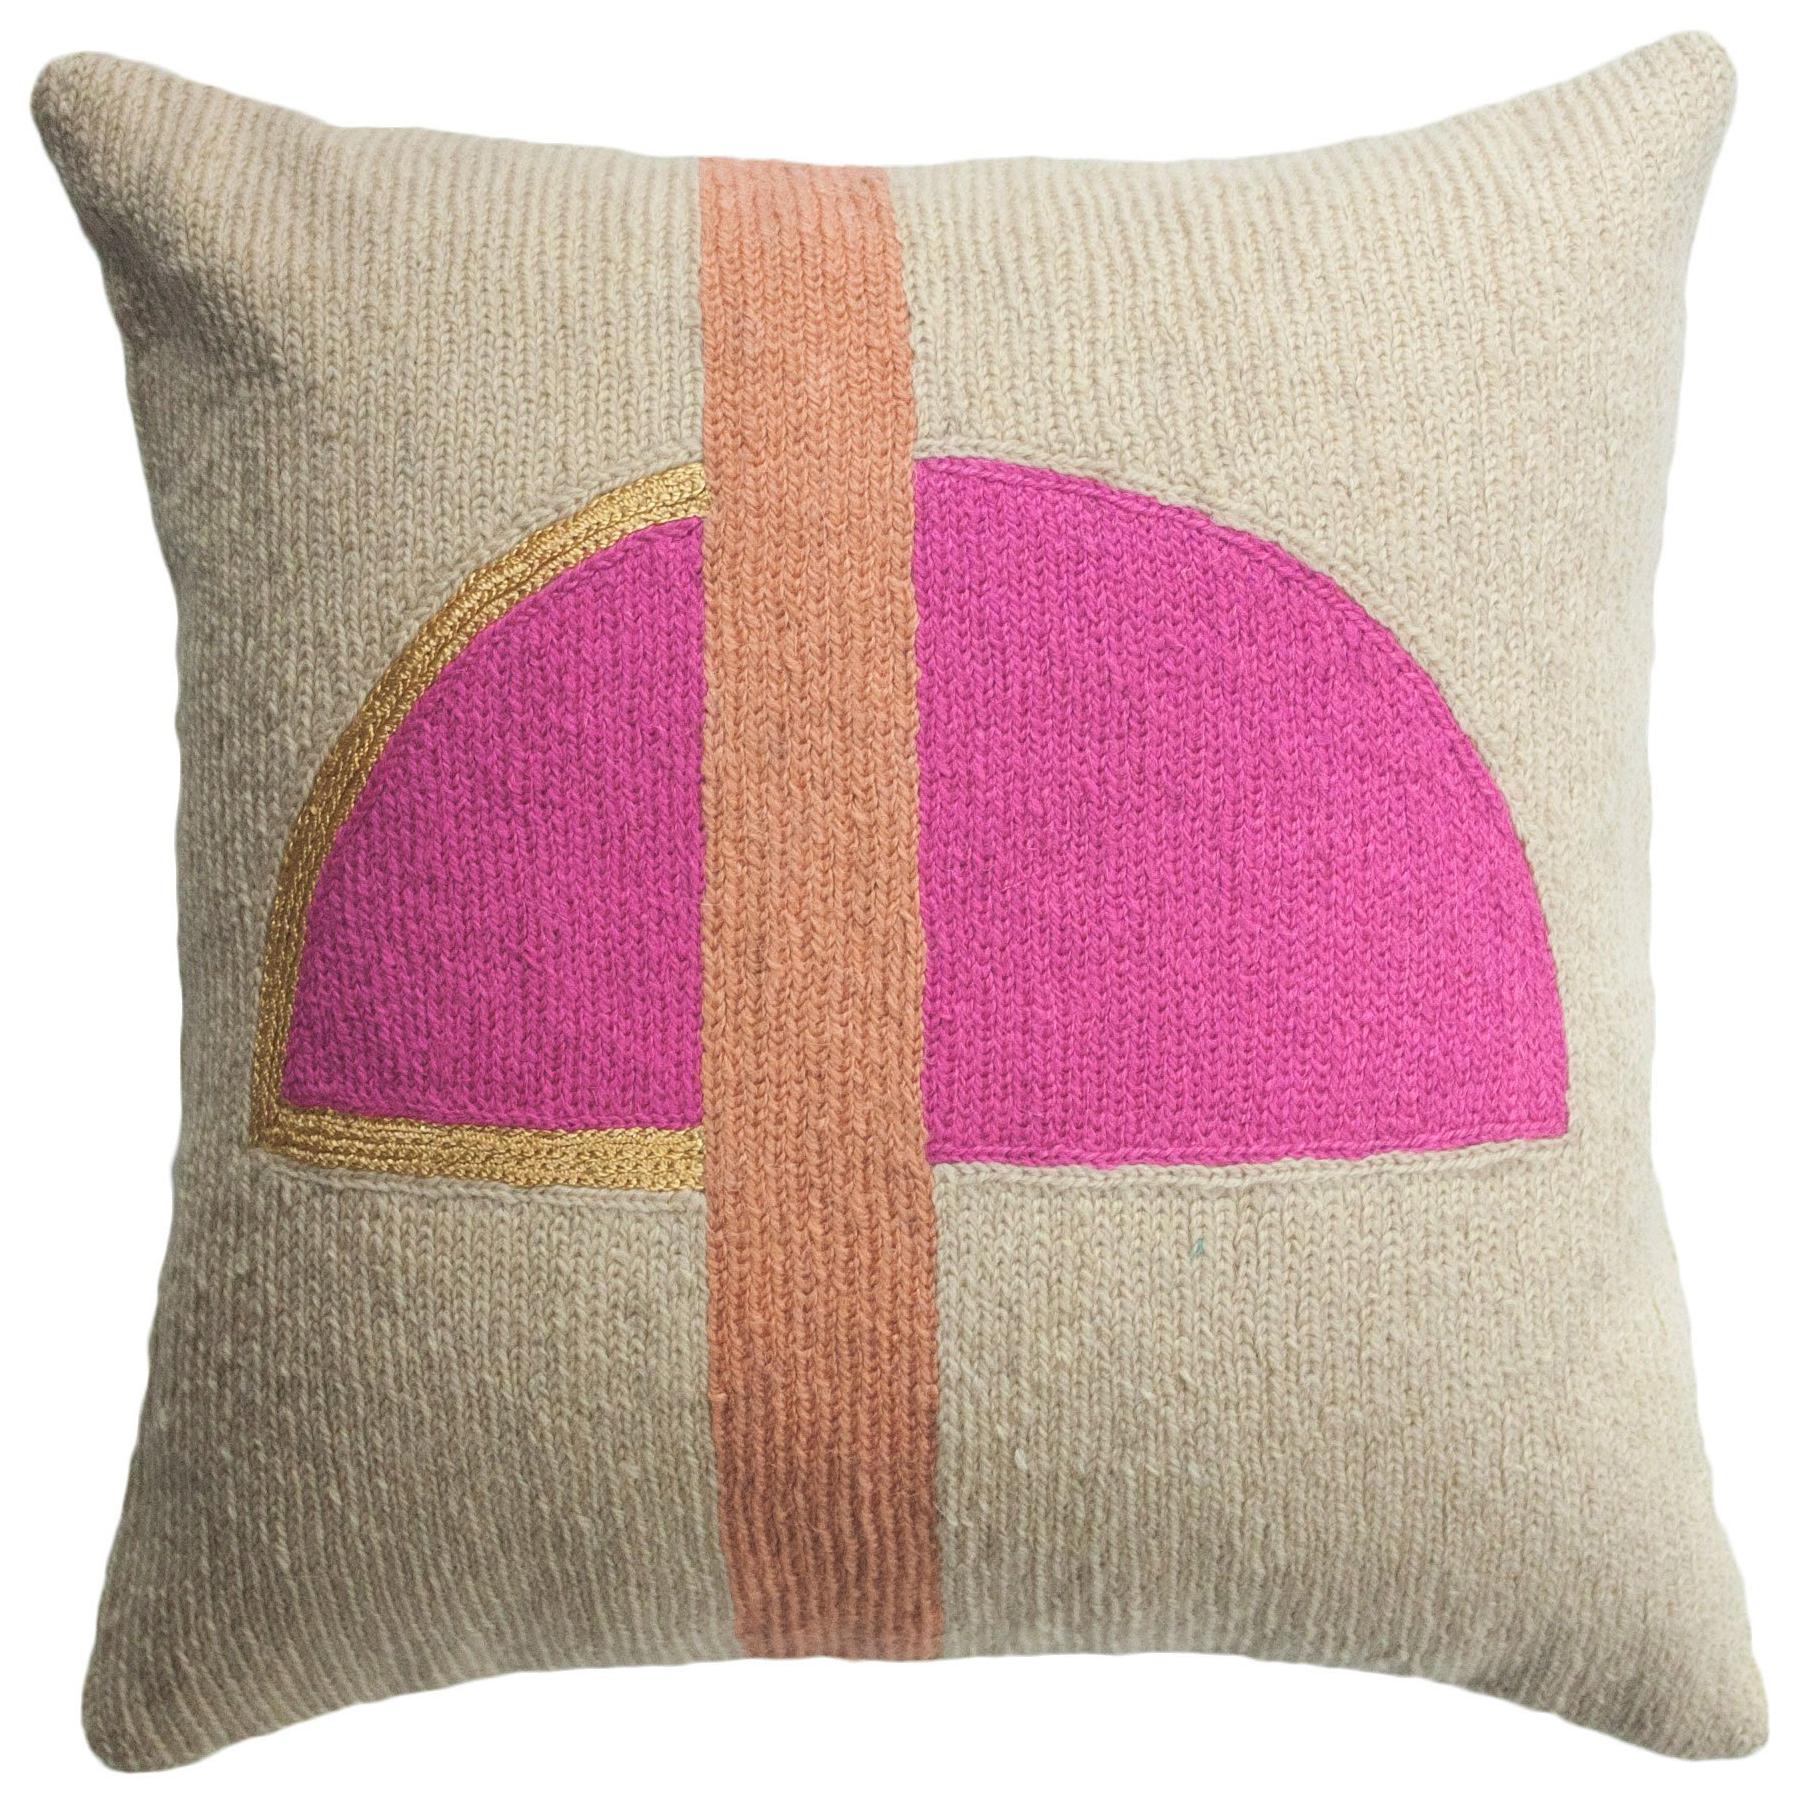 Nia Rise Hand Embroidered Modern Geometric Throw Pillow Cover